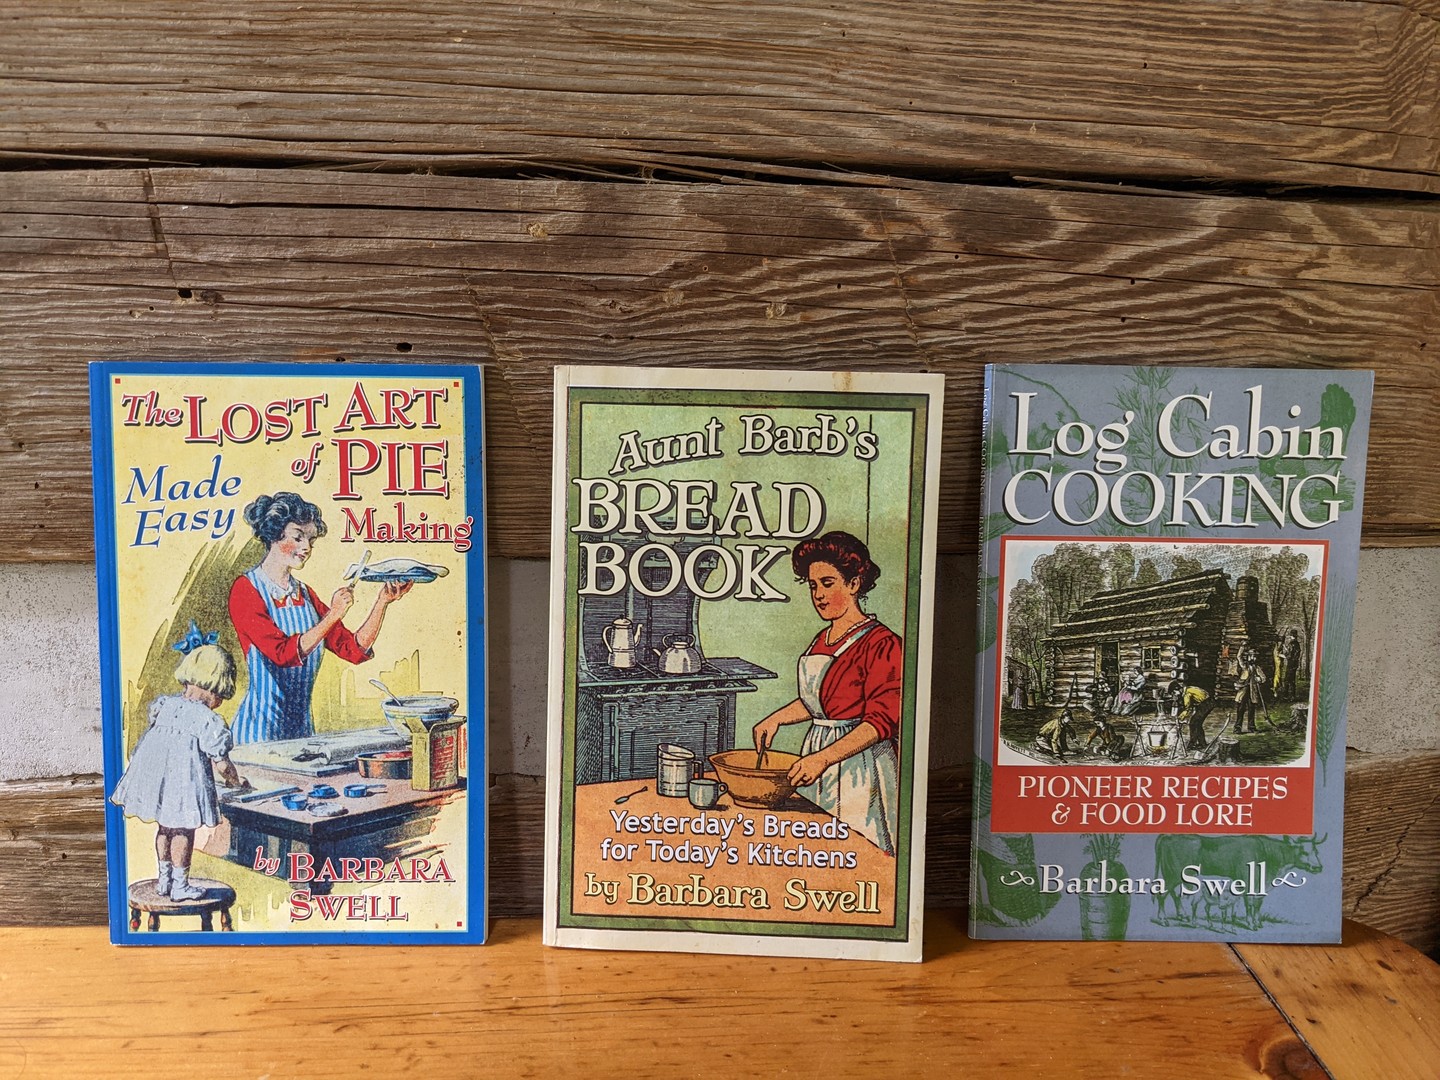 At Native Ground, we’re happy to sell books on music, folklore, and food at accessible price points. Many of our books are less than $7! Shop today at the link in our bio.

#bluegrass #piemaking #oldtime #mountainmusic #bluegrassmusic #oldtimemusic #bakingbread #logcabincooking @logcabincooking #pioneerlife #folklore #folklife #foodlore #appalachia #logcabins #southernliving